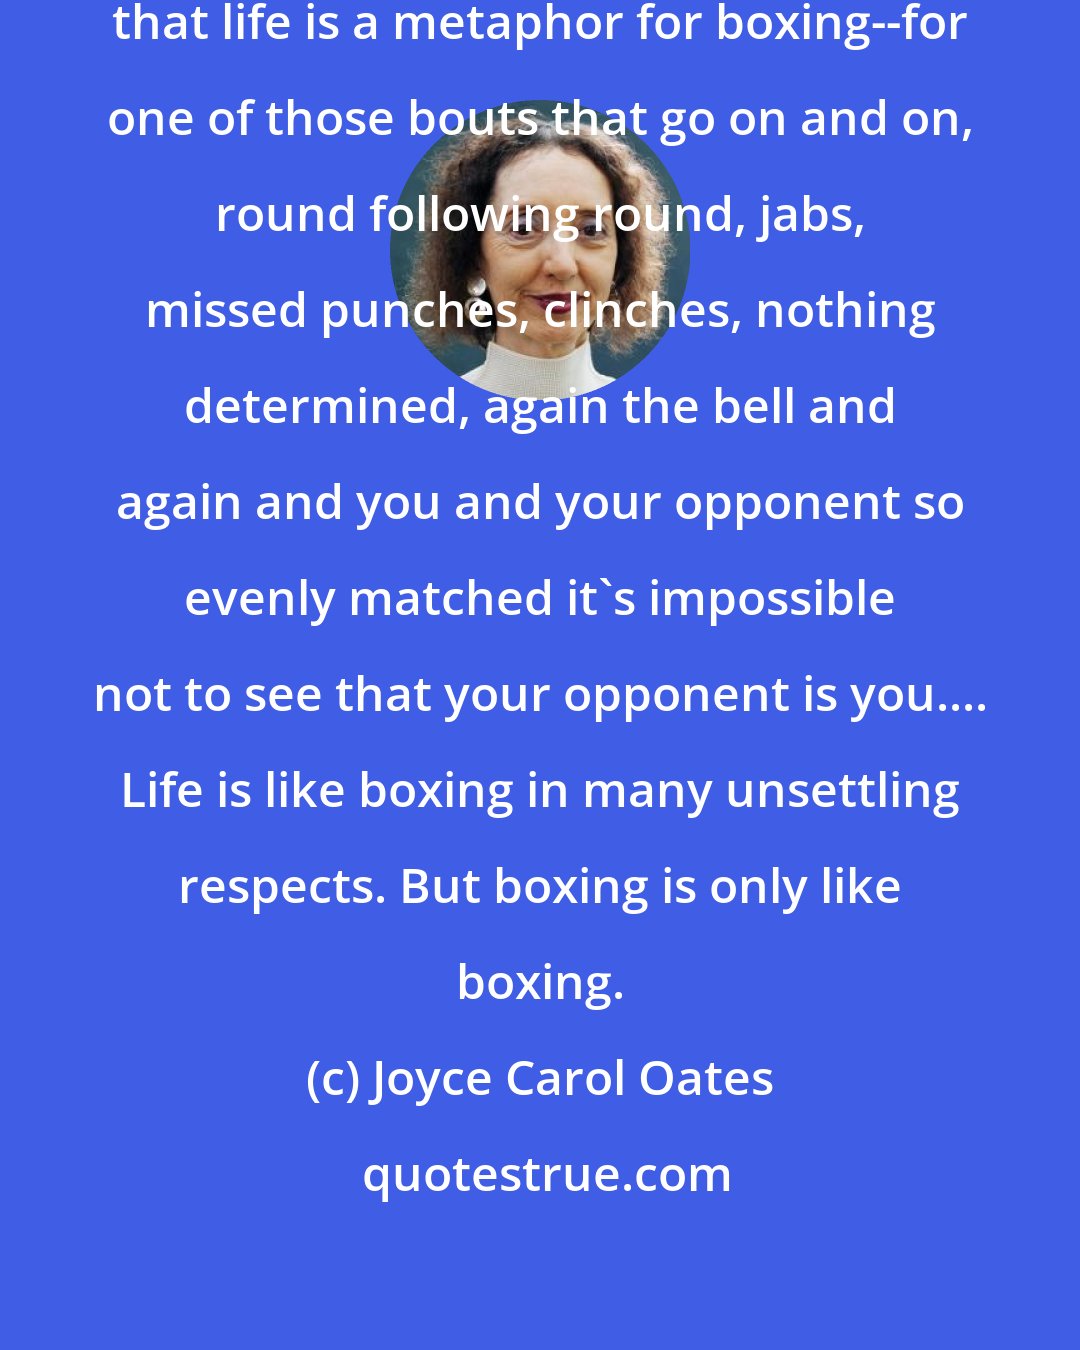 Joyce Carol Oates: I can entertain the proposition that life is a metaphor for boxing--for one of those bouts that go on and on, round following round, jabs, missed punches, clinches, nothing determined, again the bell and again and you and your opponent so evenly matched it's impossible not to see that your opponent is you.... Life is like boxing in many unsettling respects. But boxing is only like boxing.